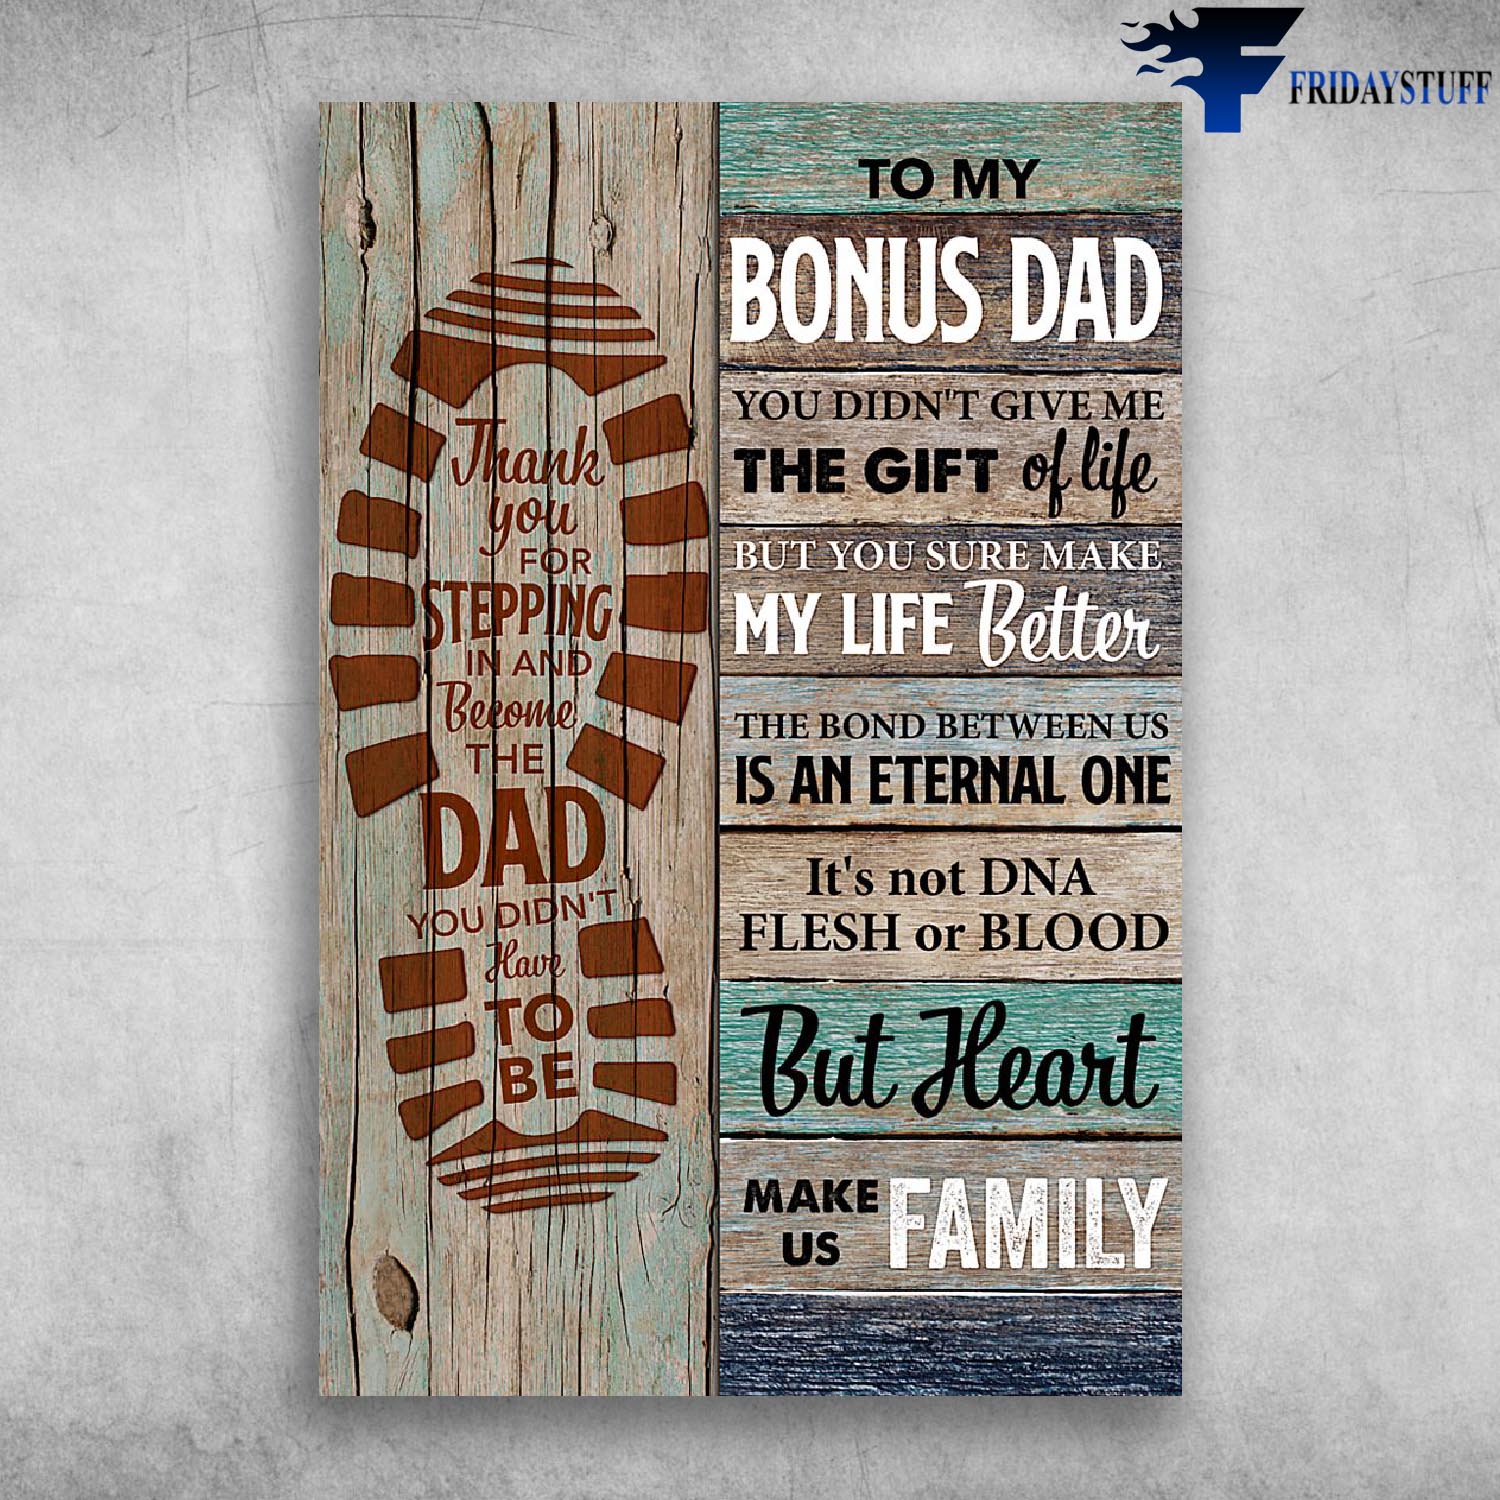 Download To My Bonus Dad You Didn't Give Me The Gift Of Life - Thank You For Stepping In And Become The ...